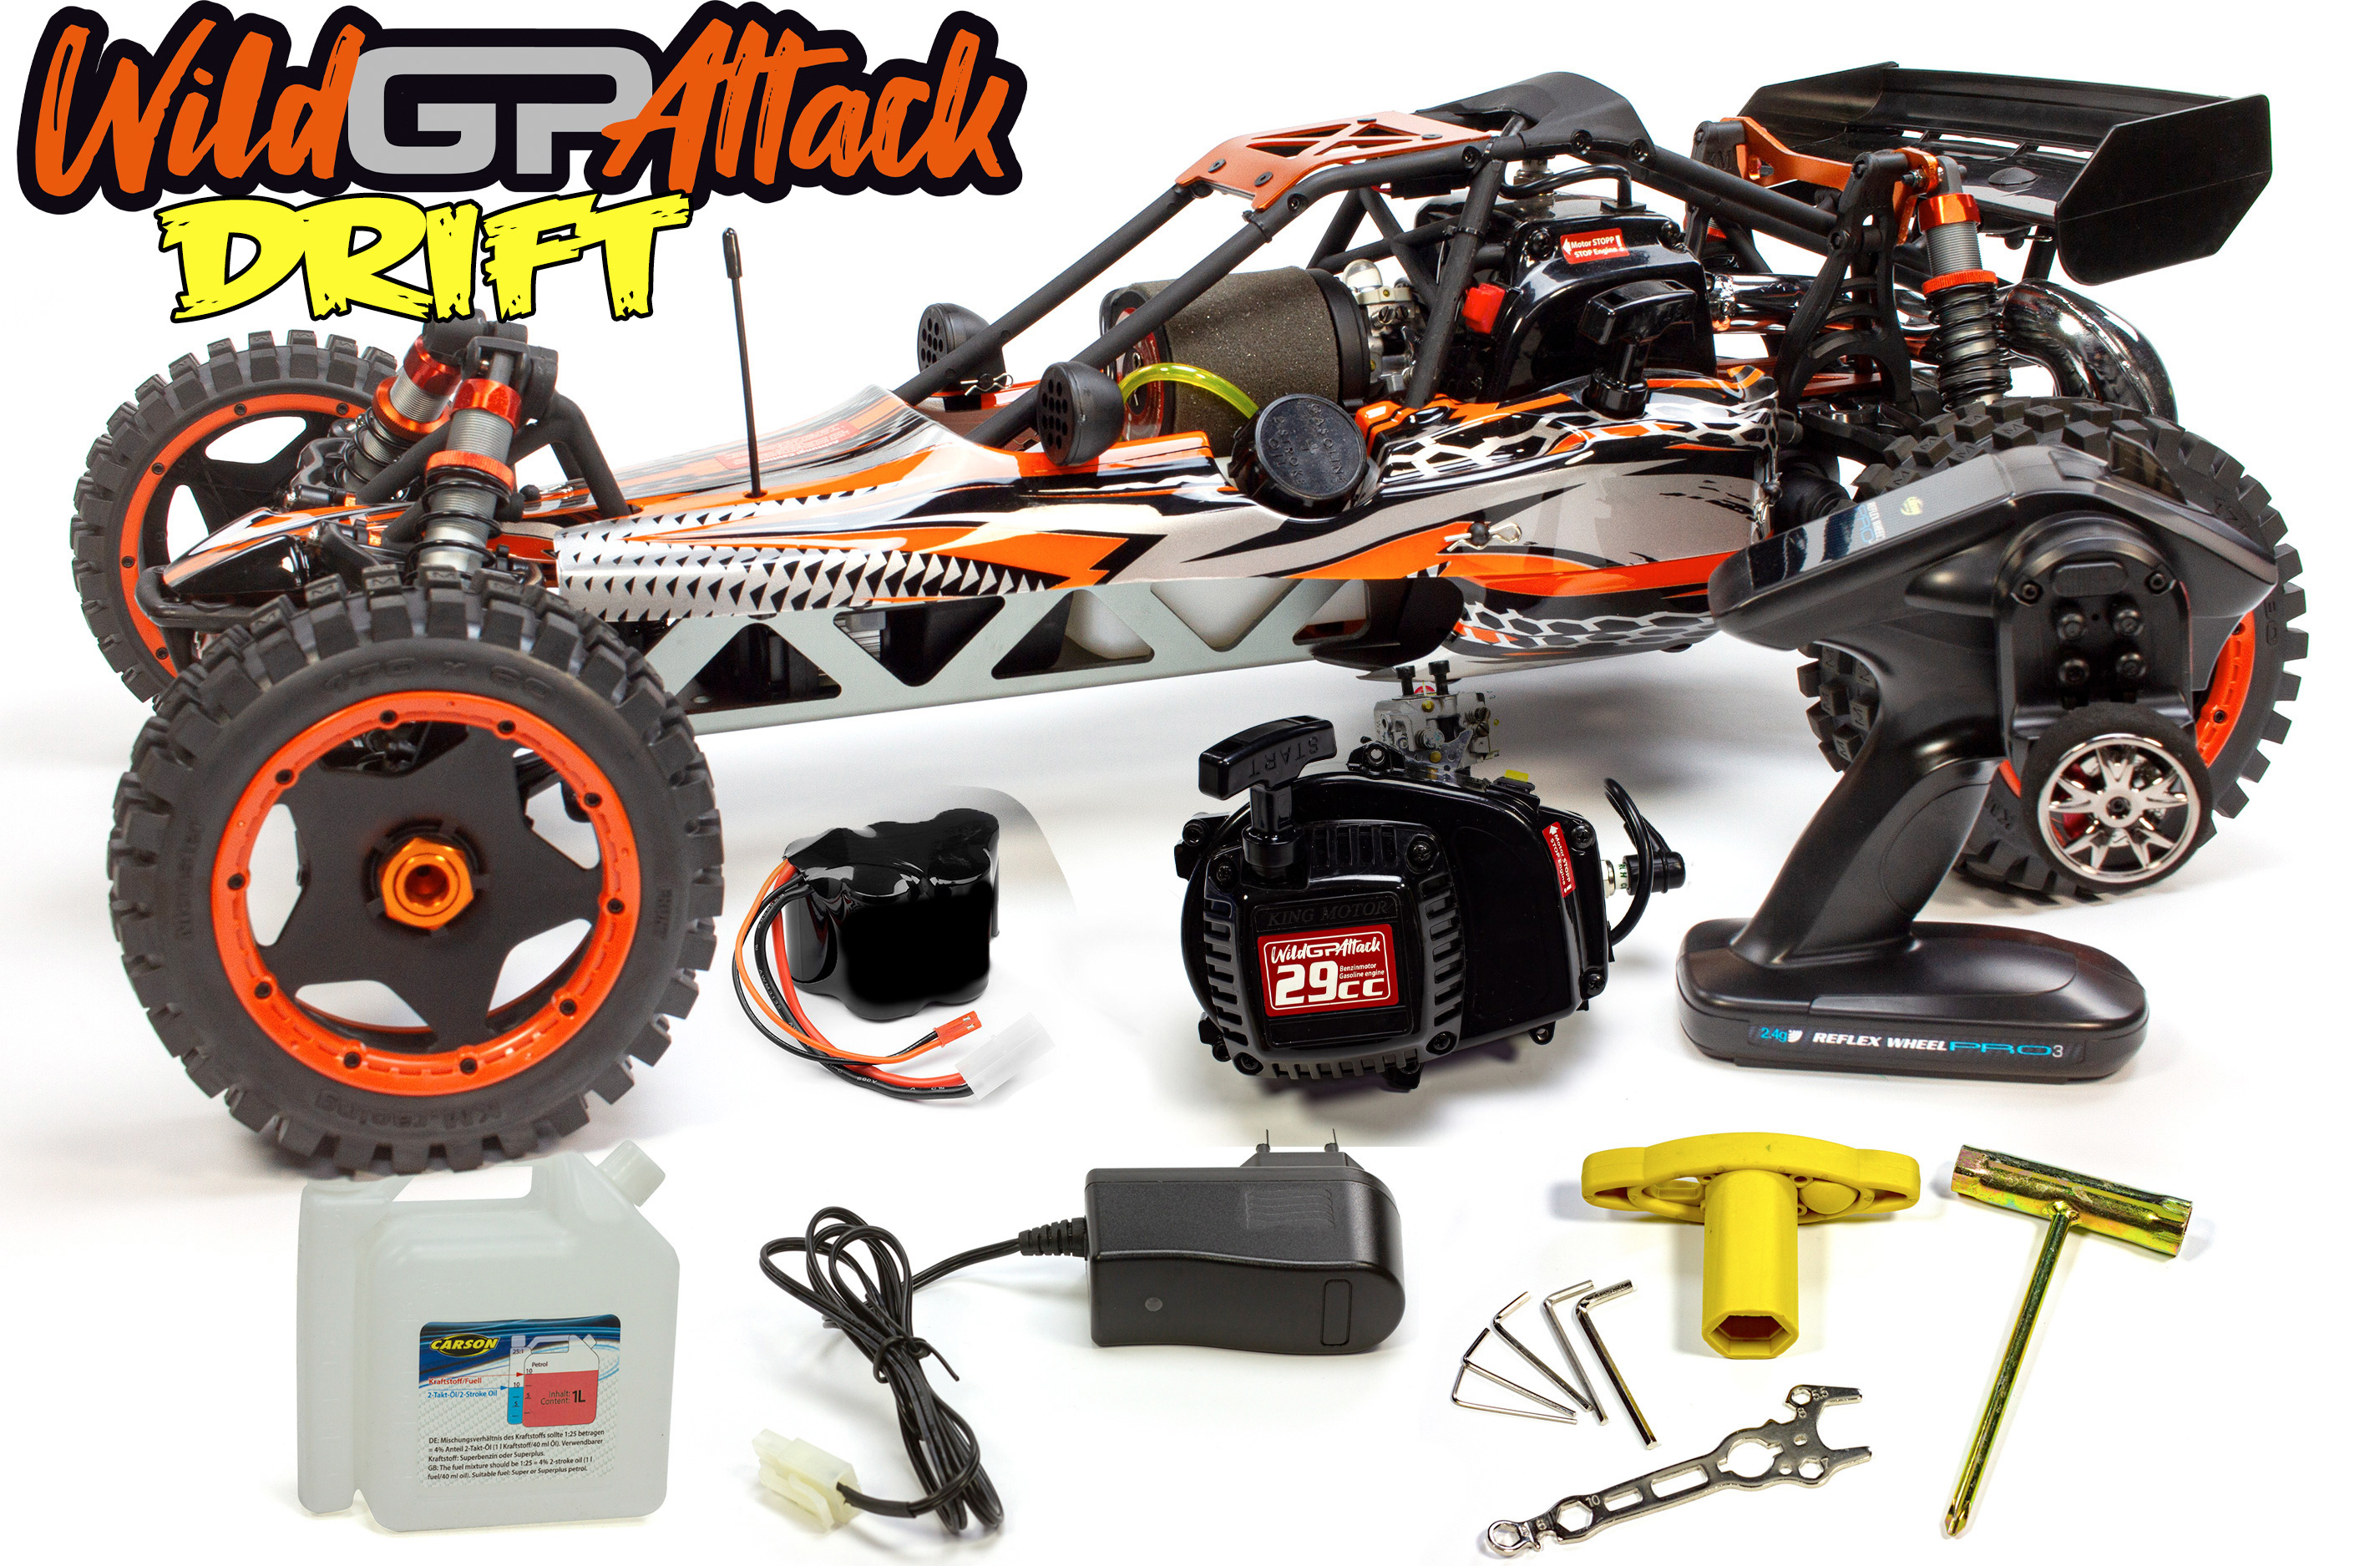 500304032D Carson 1/5 Wild GP Drift Attack 2.4G RTR, 29cc engine, with all accessories